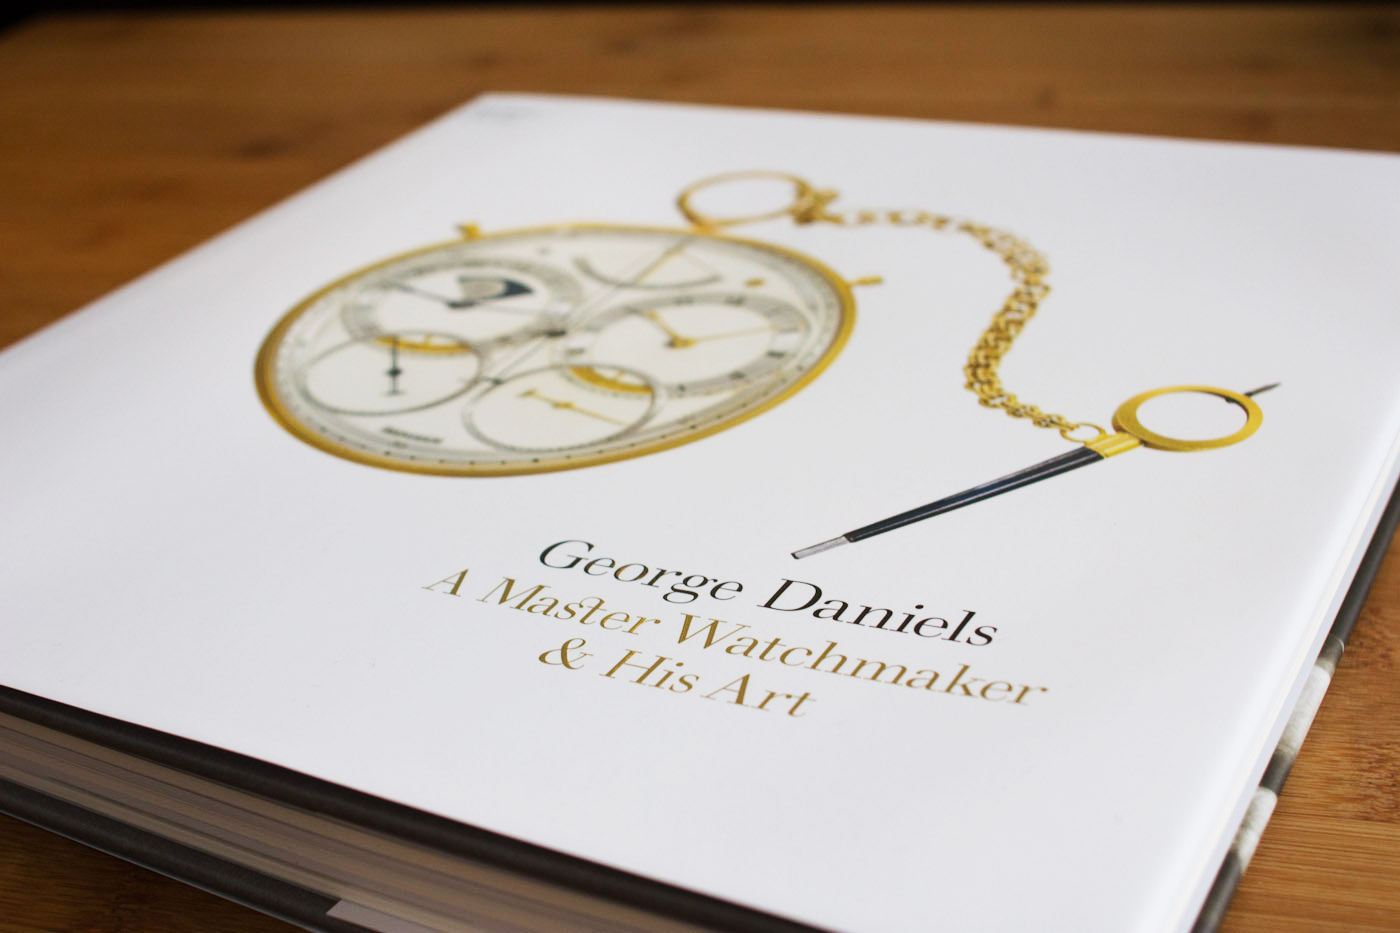 George Daniels: A Master Watchmaker & His Art, By Michael Clerizo 